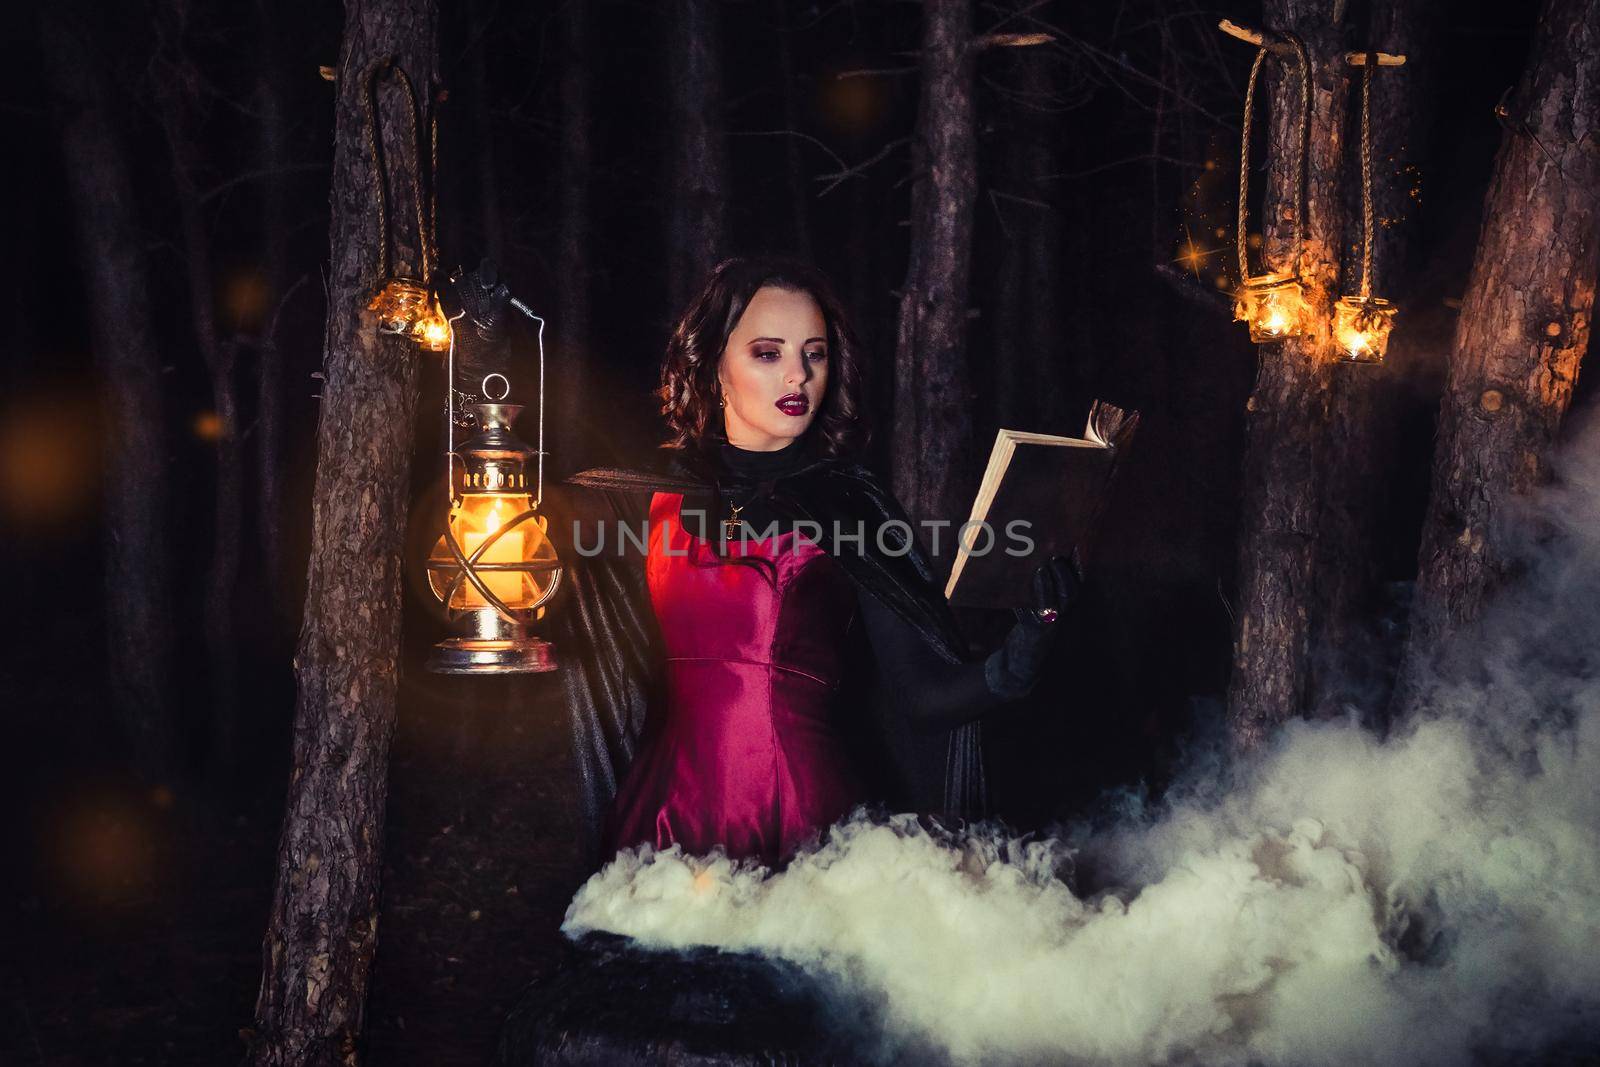 girl alone at night in the forest brews a potion and wonders for marriage, surrounded by candles and smoke